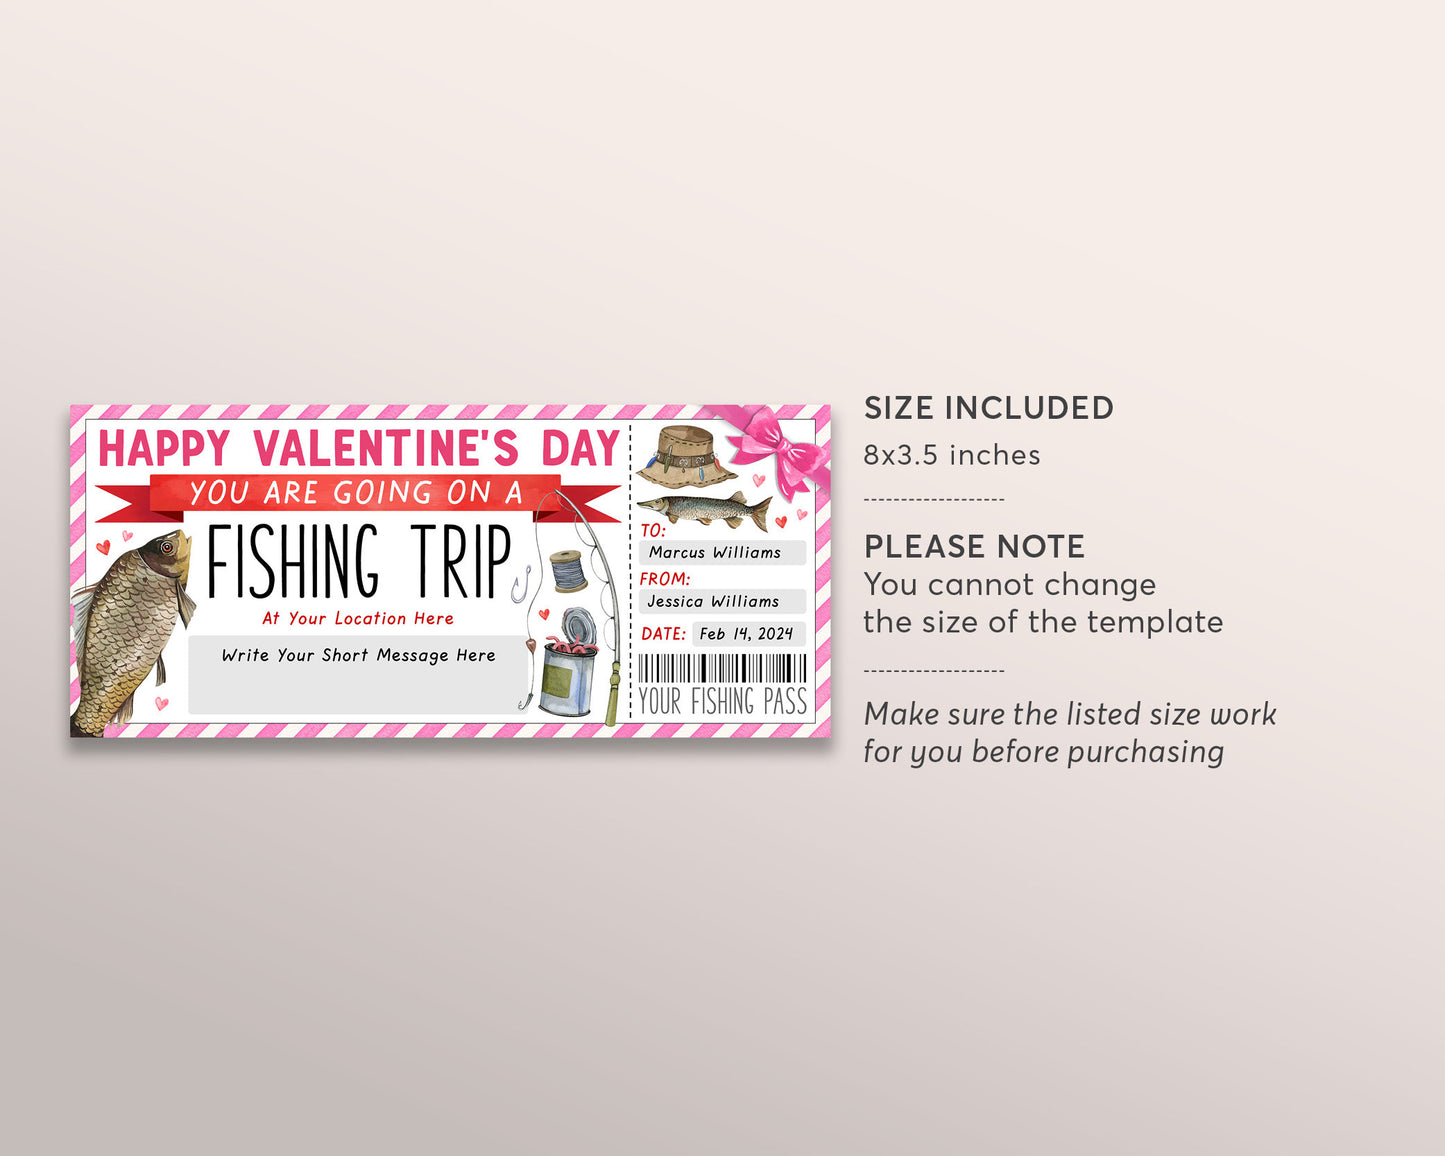 Valentines Day Fishing Trip Ticket Editable Template, Fishing Trip Reveal Gift Certificate For Boyfriend, Fishing Day Trip Voucher Coupon